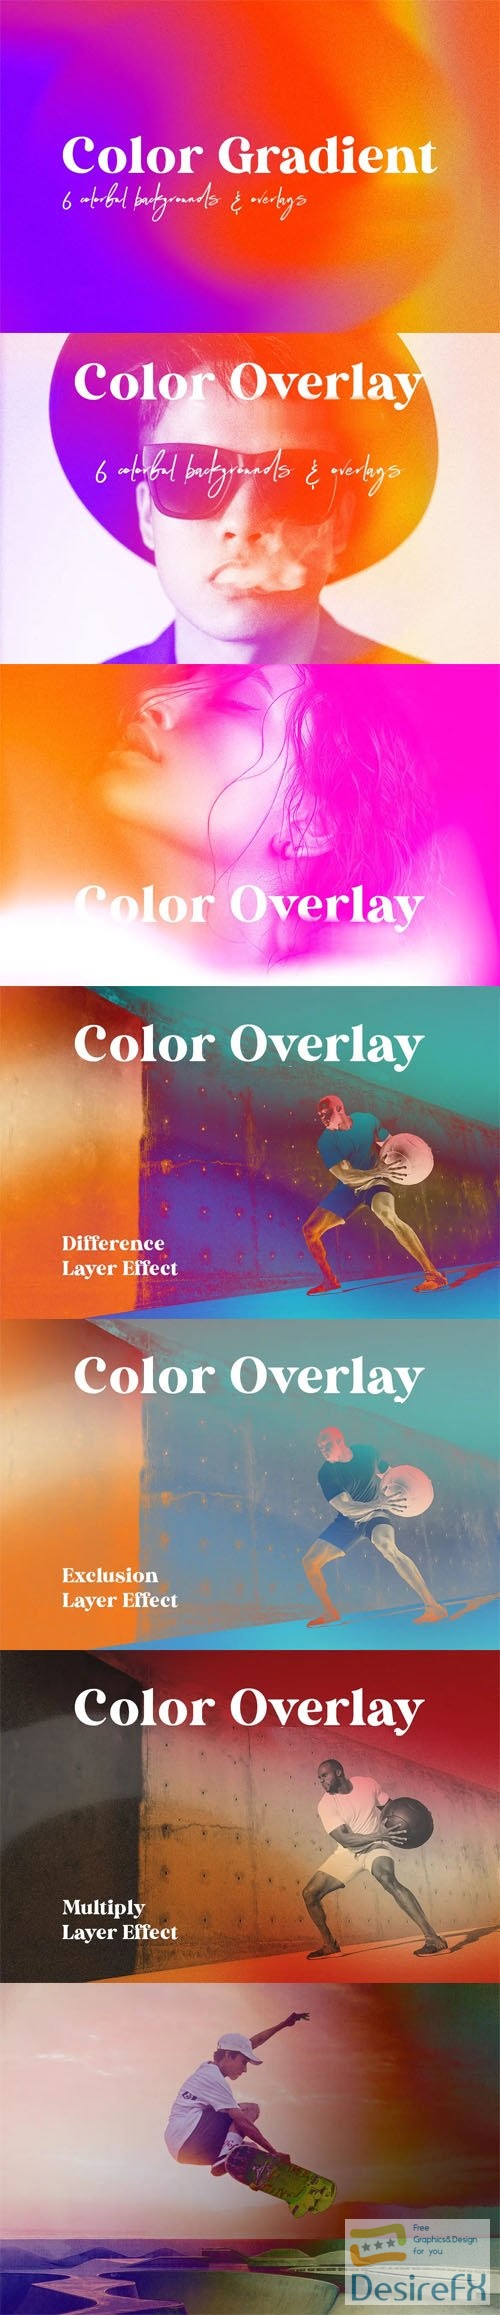 Color Gradient - 30 Colorful Backgrounds &amp; Overlays